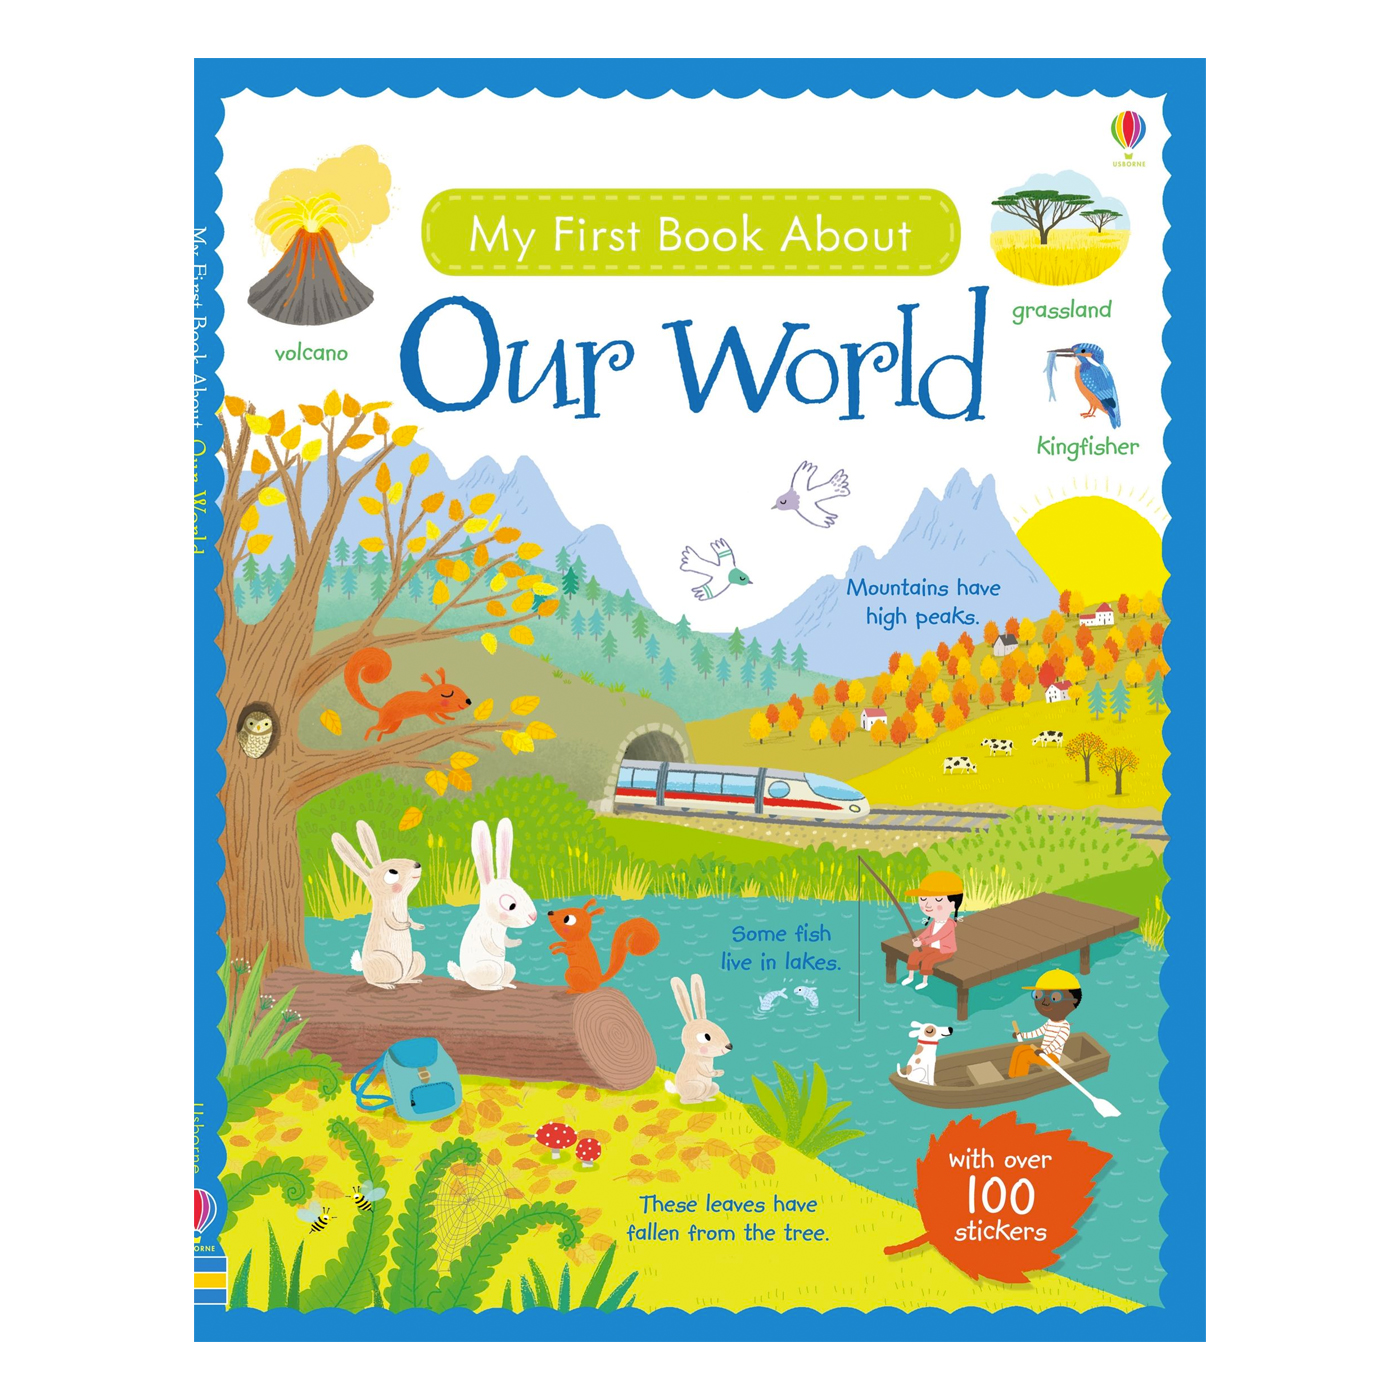  My First Book About Our World